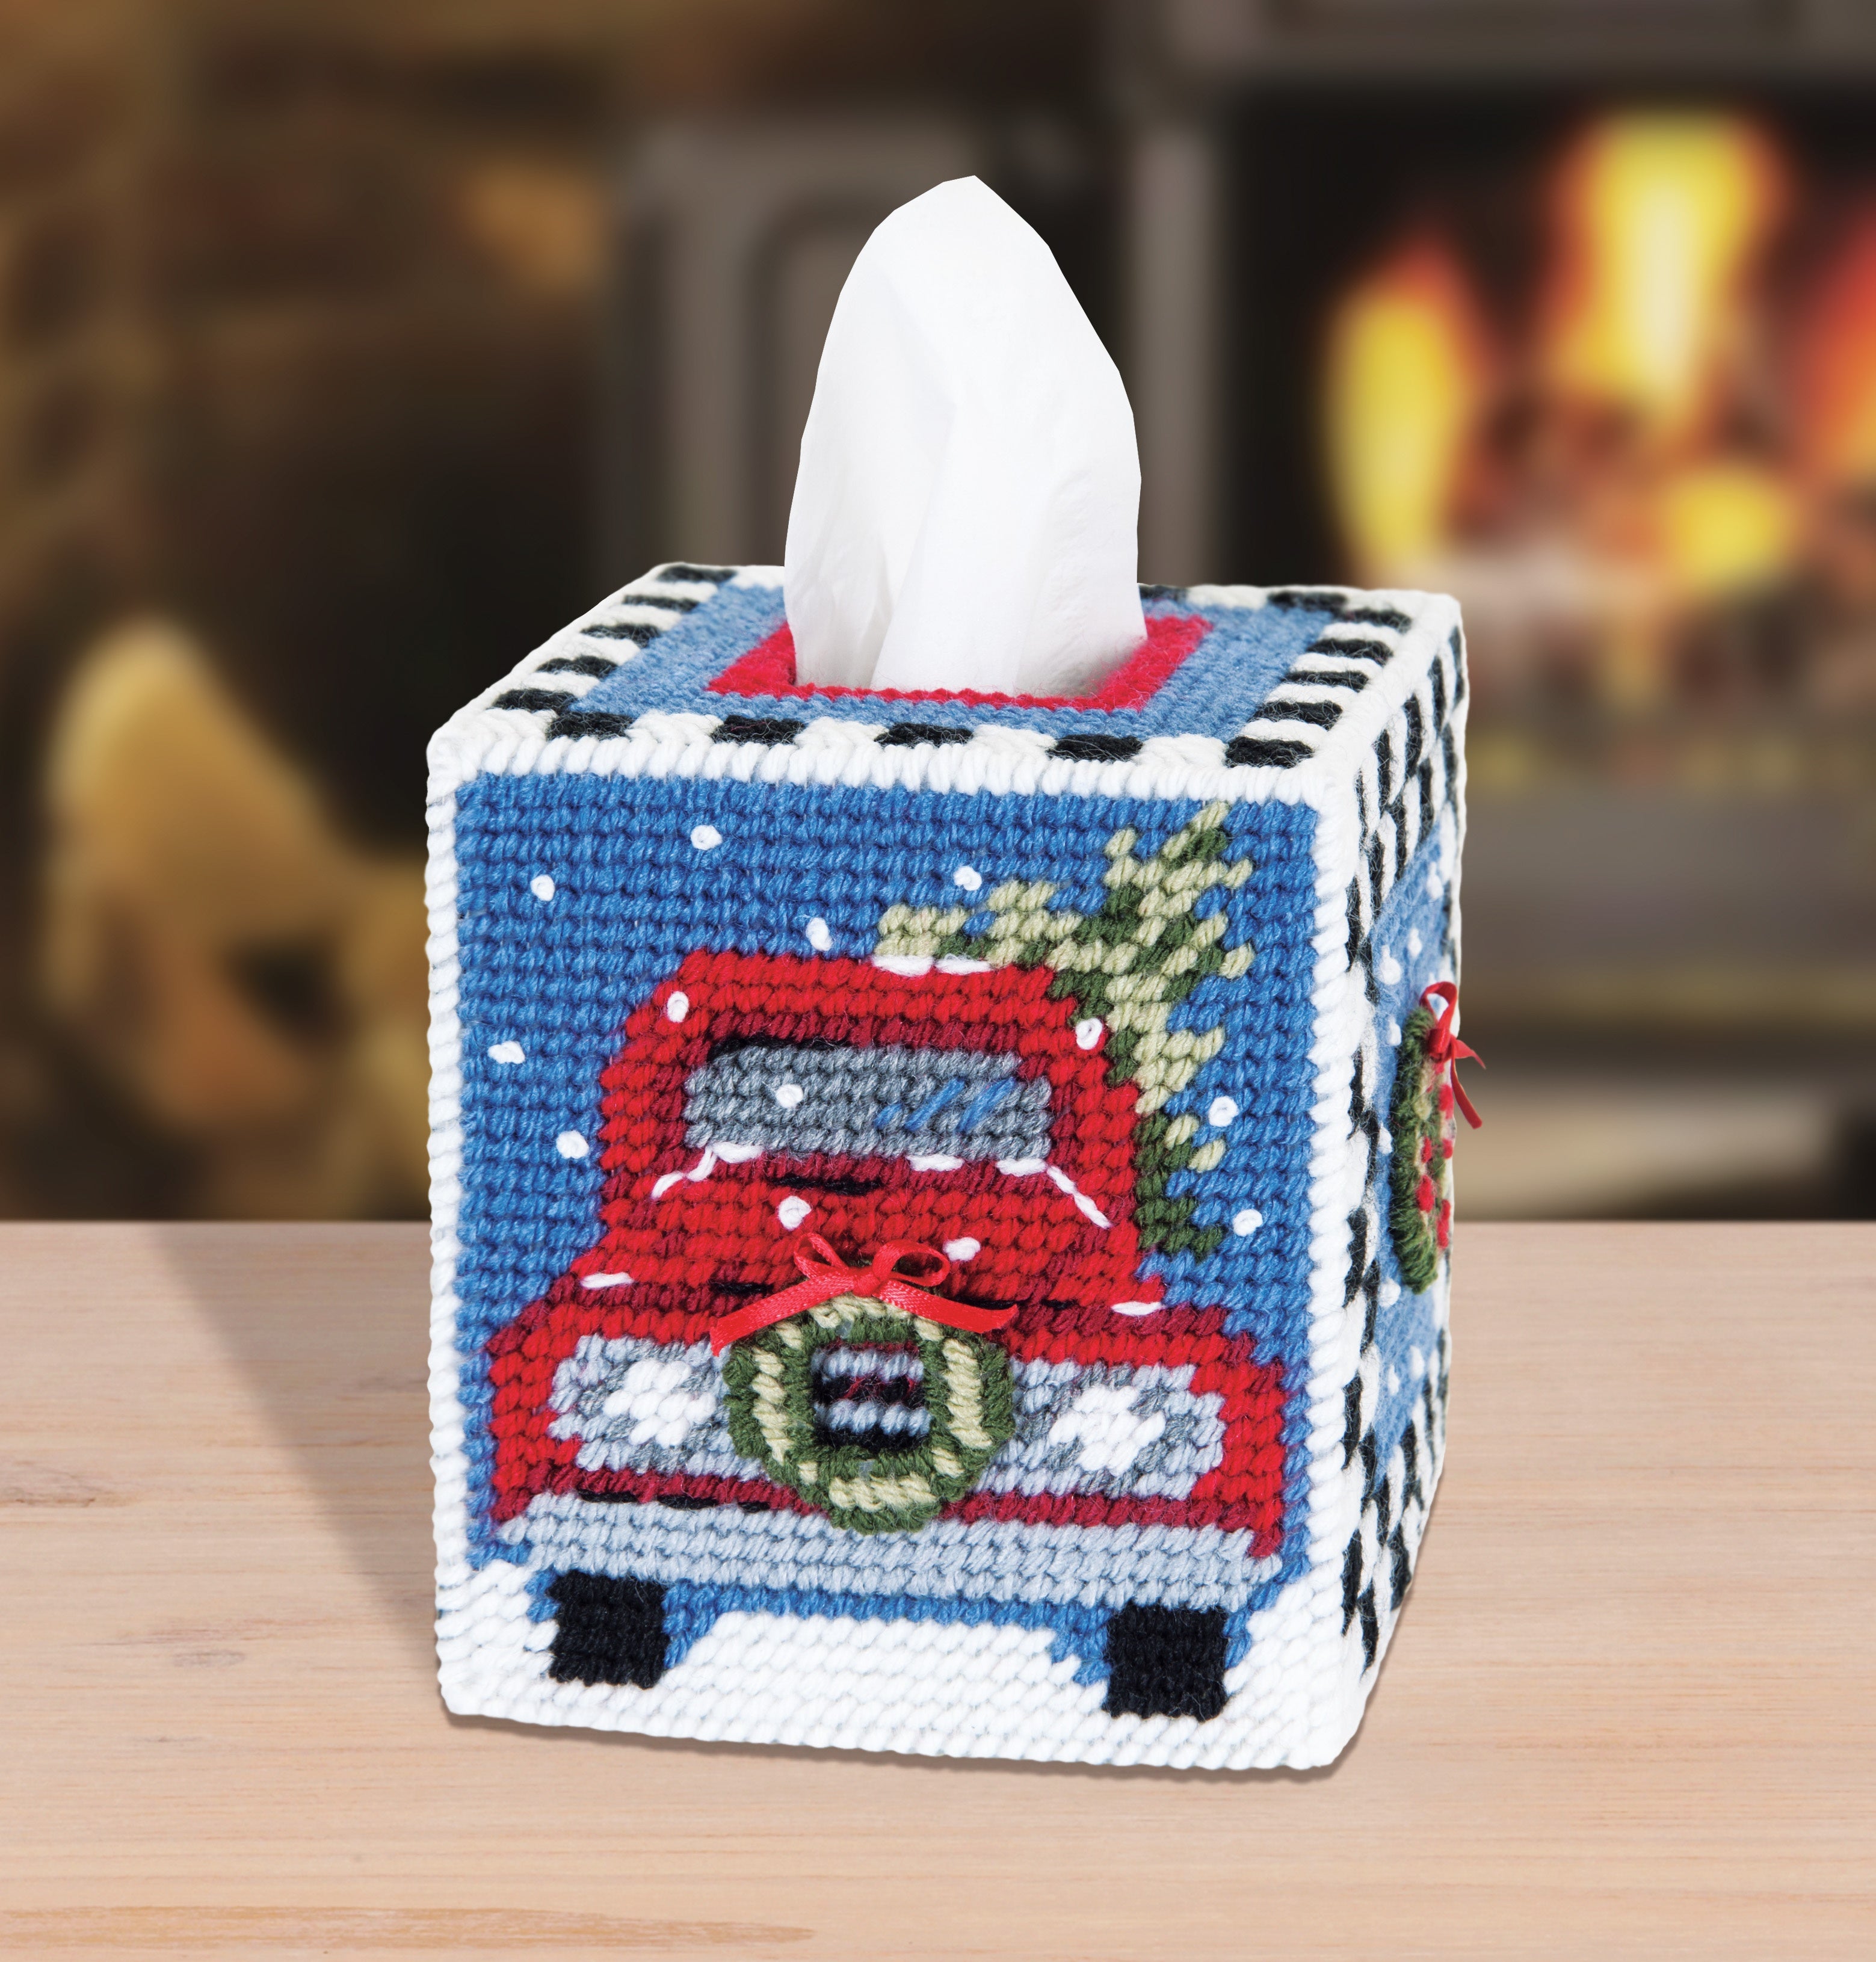 Plastic Canvas Tissue Box Cover Kit. This Design features an old red truck decorated for christmas.